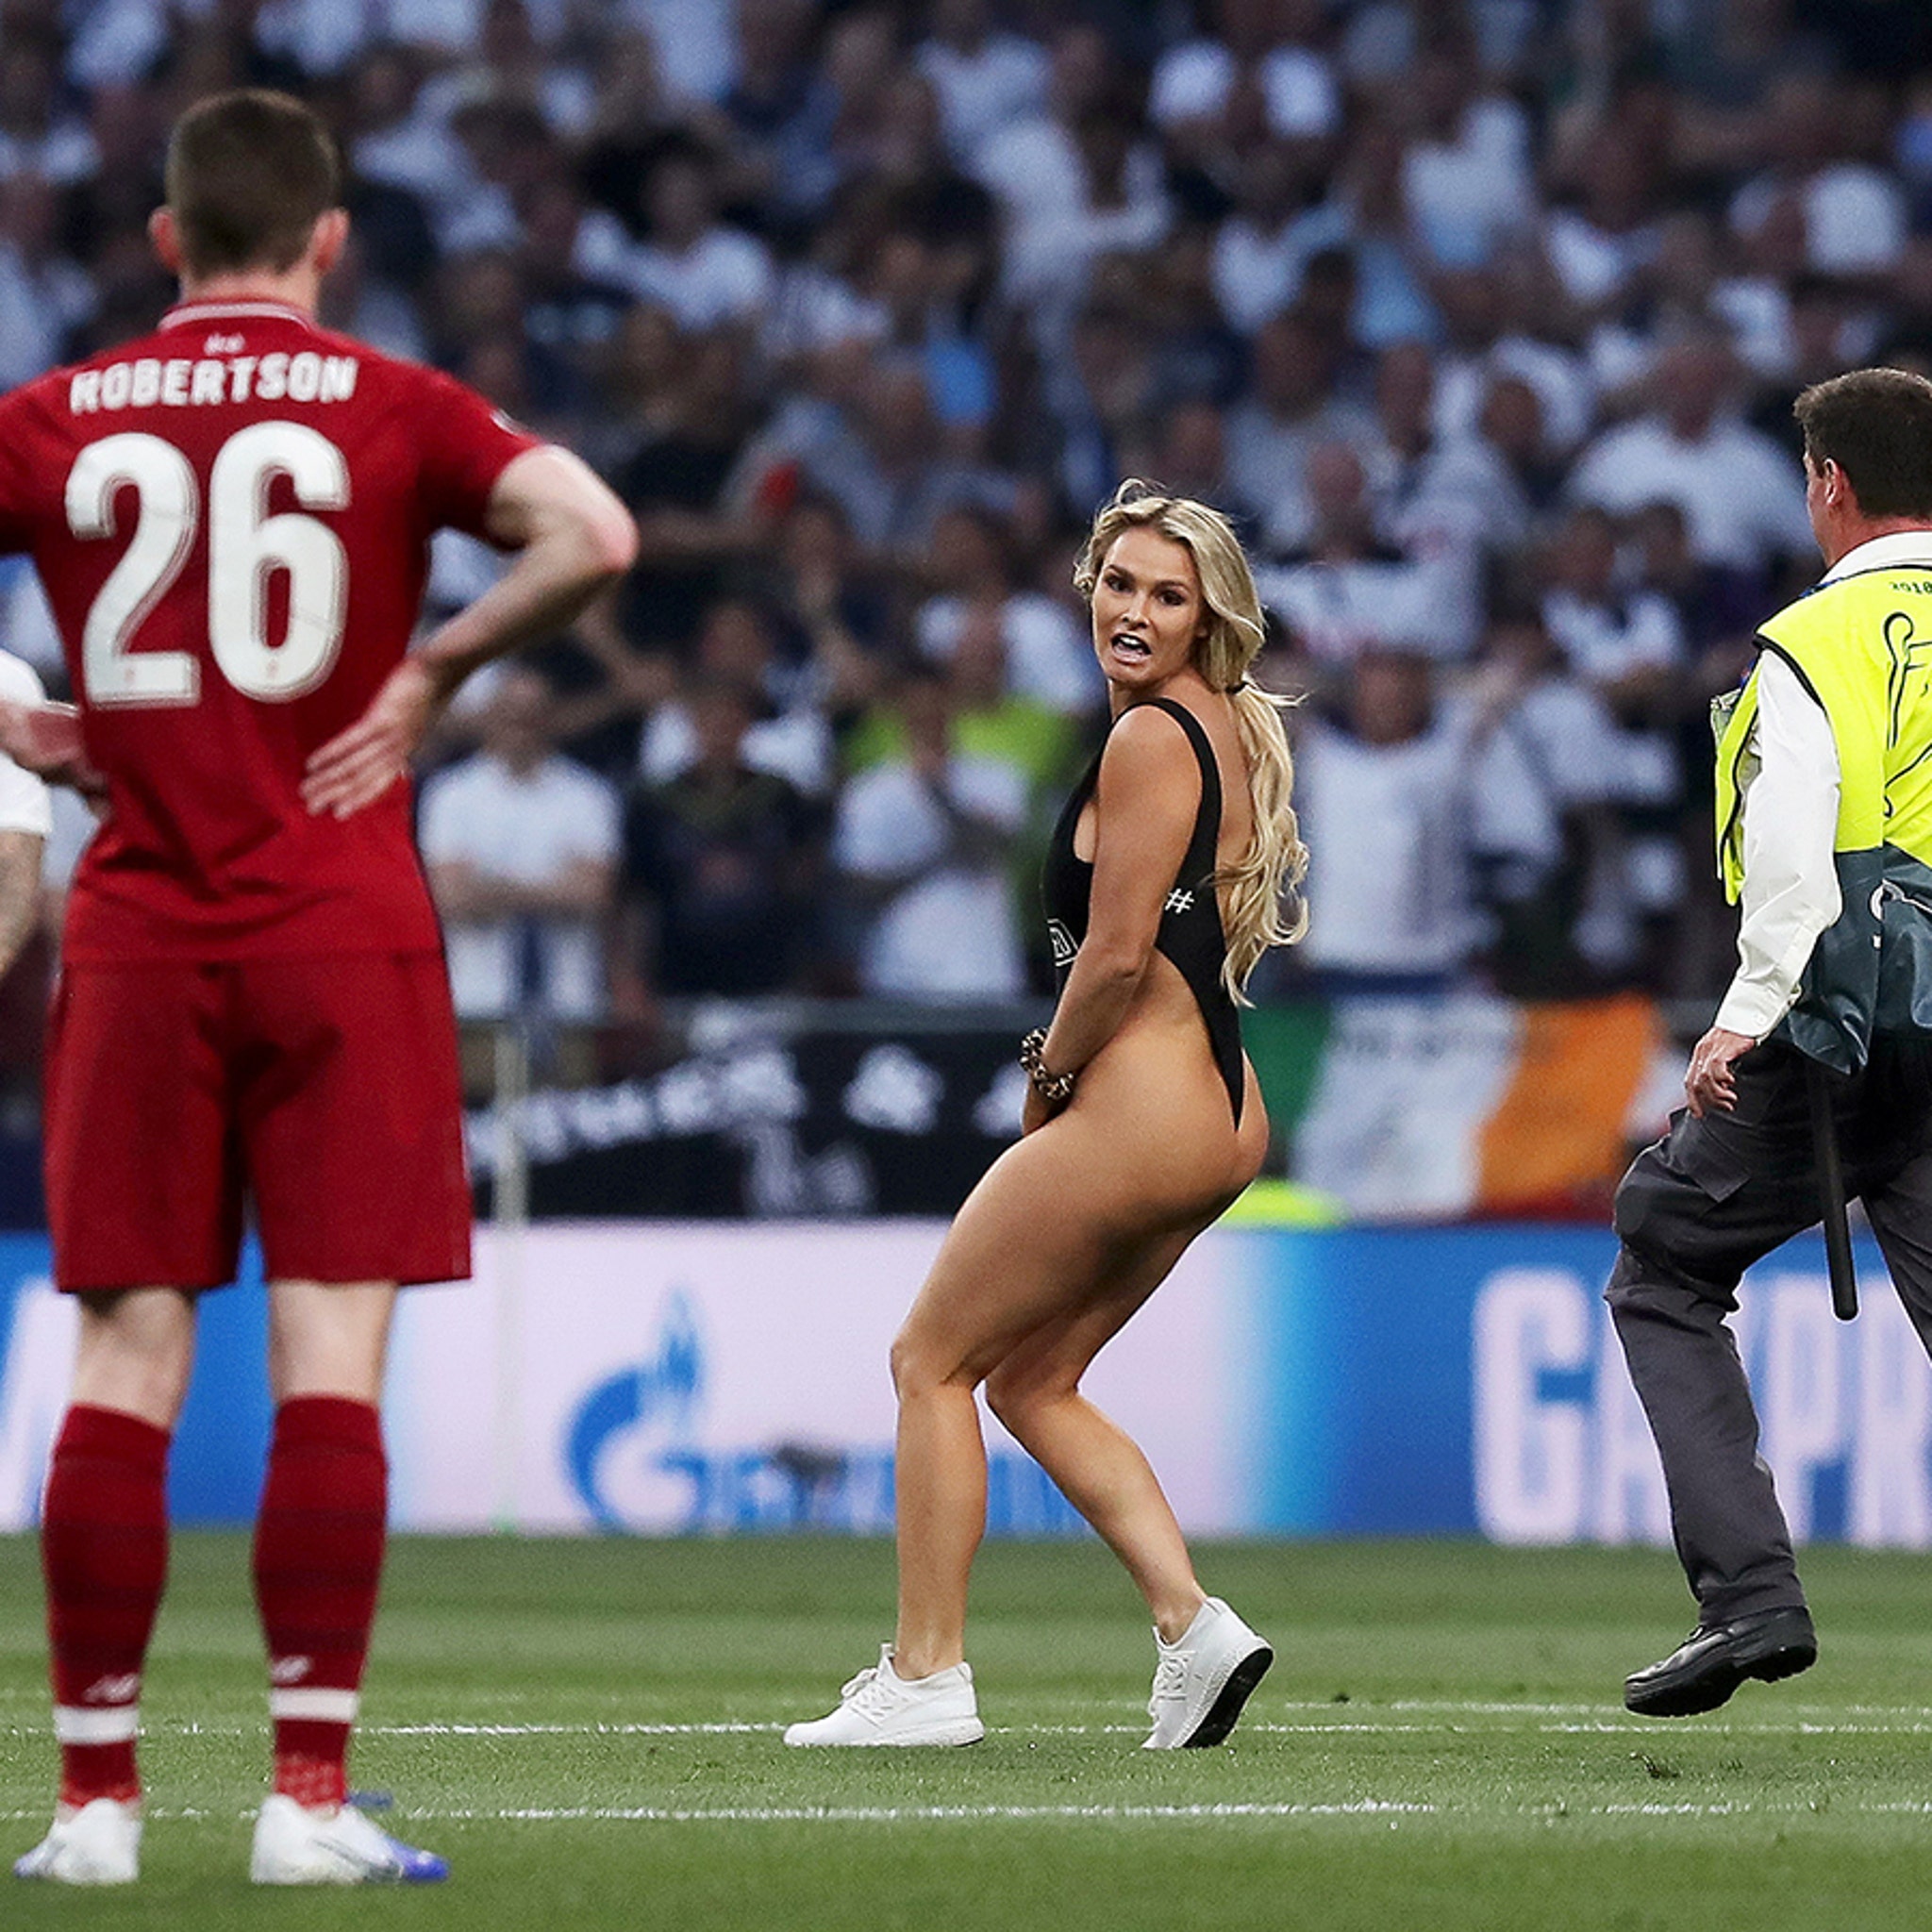 Porn star that interrupted soccer game